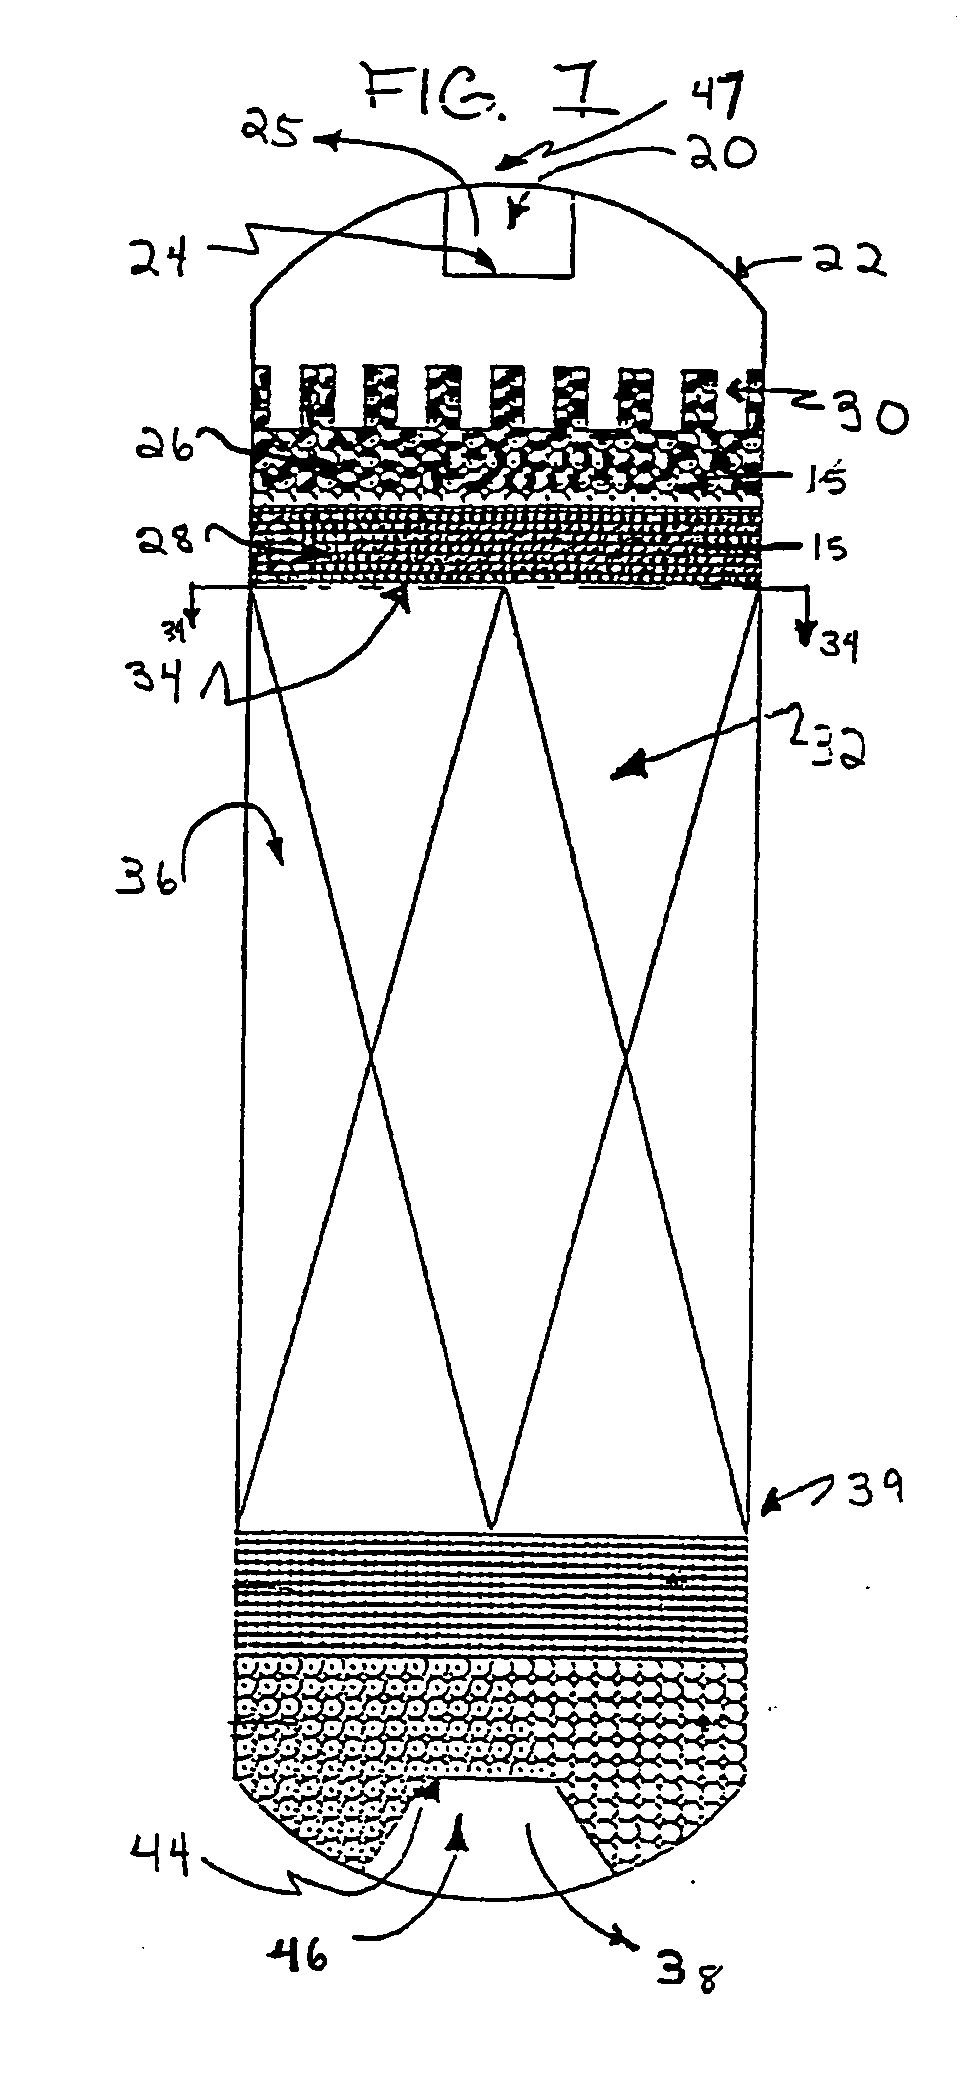 Filtering medium and method for contacting solids containing feeds for chemical reactors